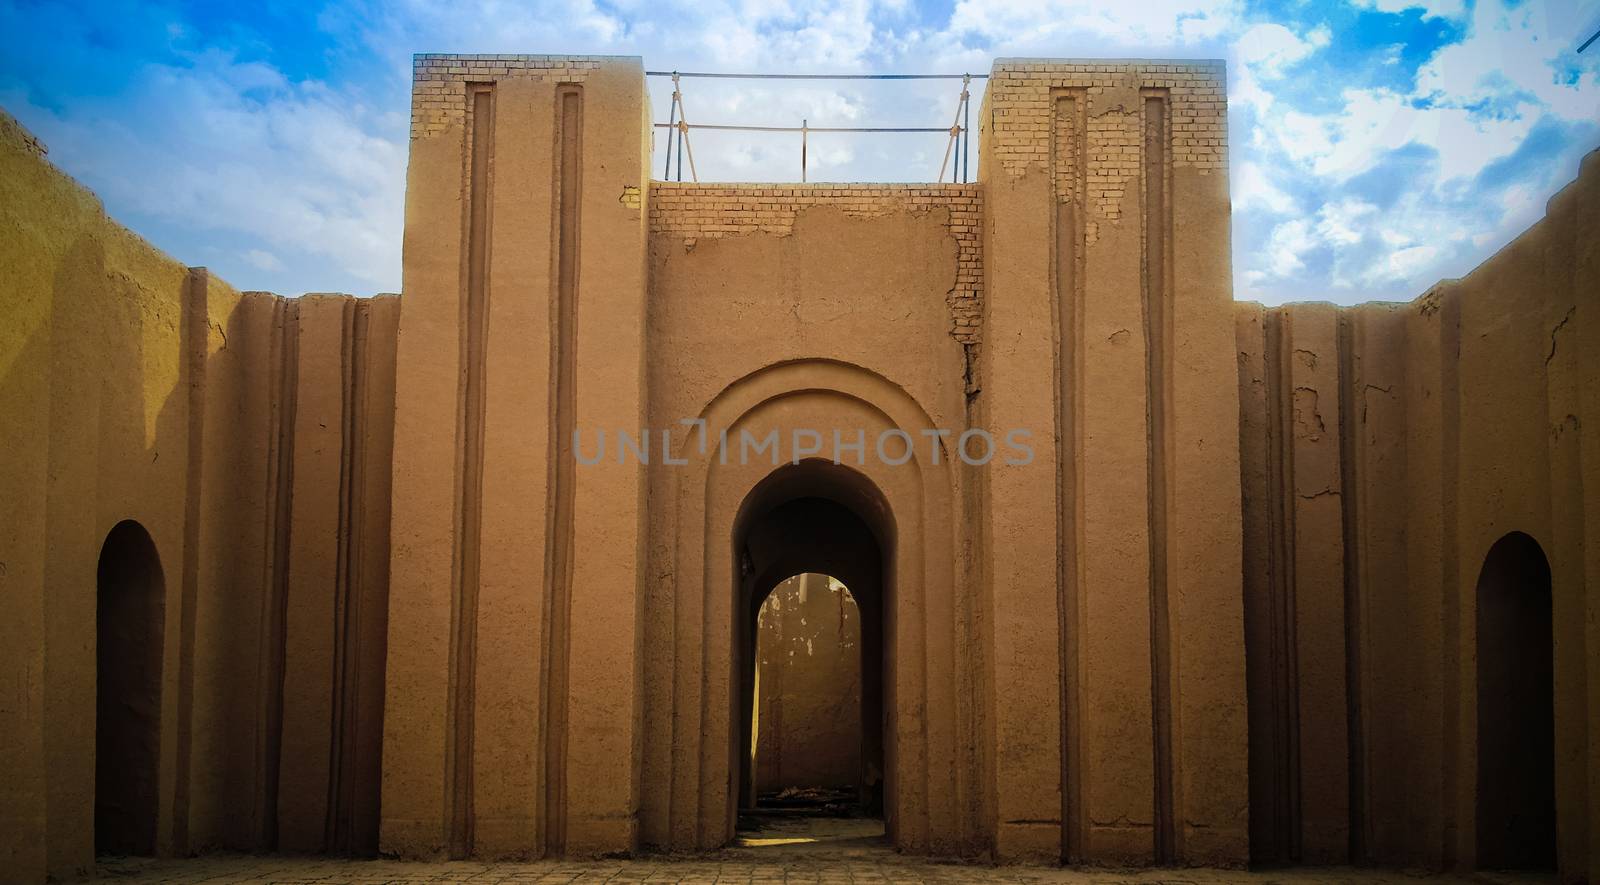 Gate of partially restored Babylon ruins, Hillah Iraq by homocosmicos